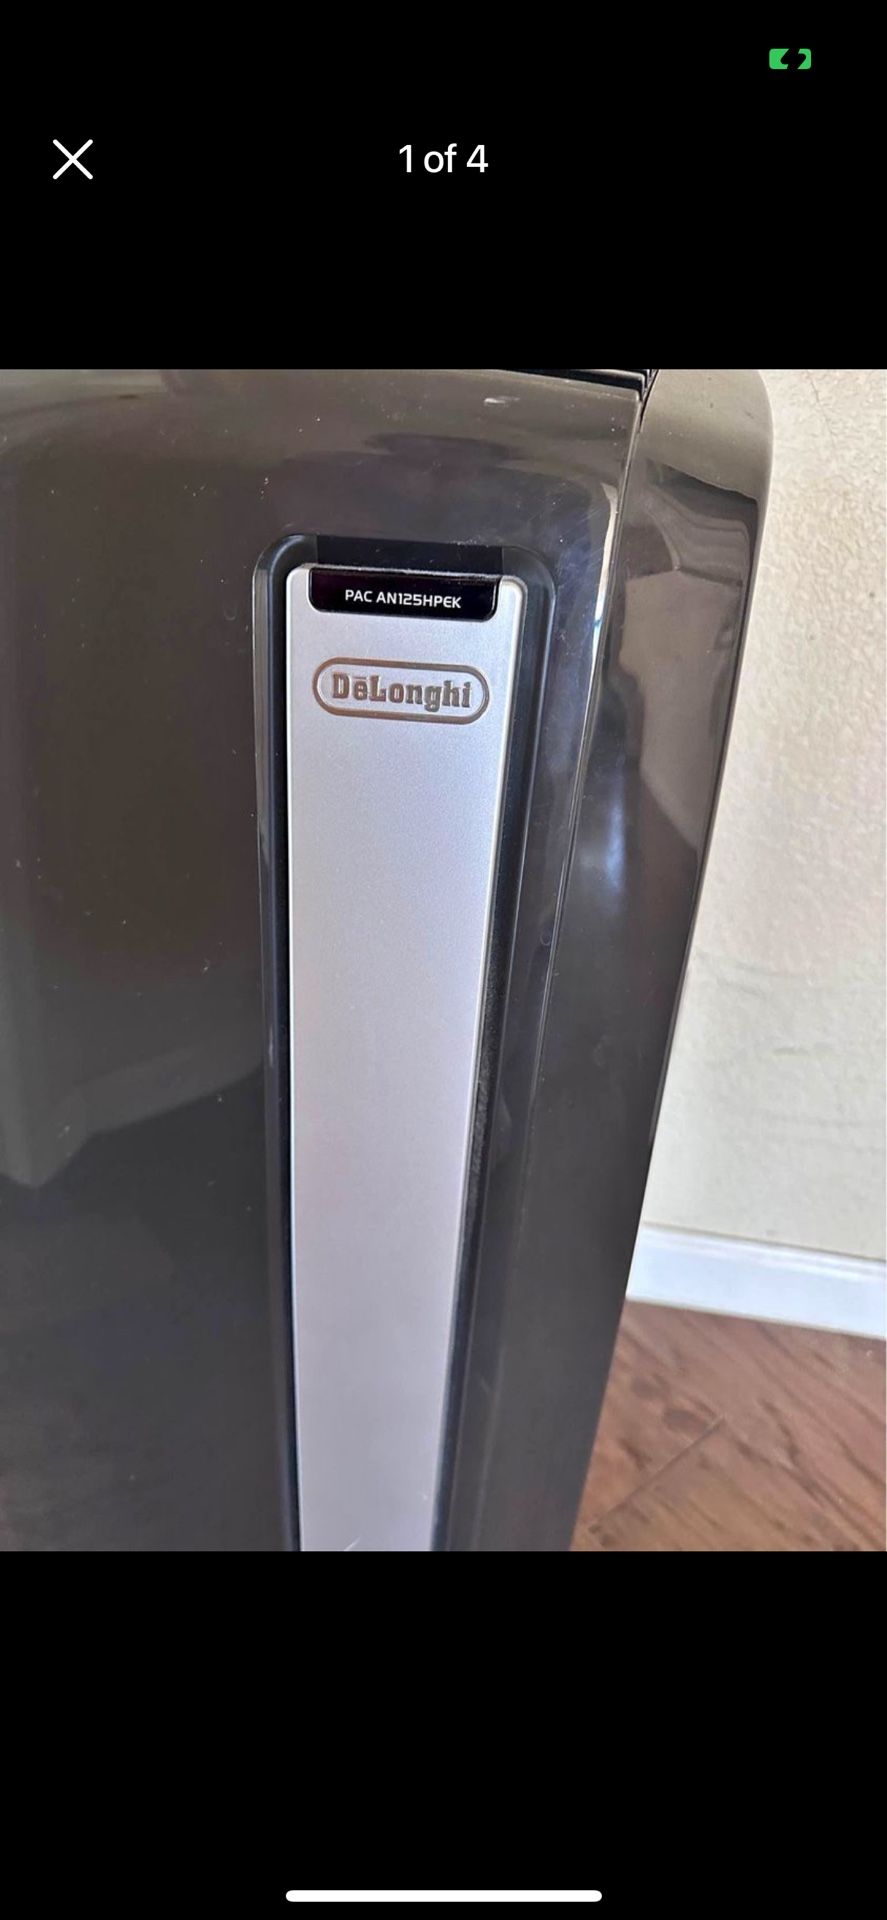 DeLonghi portable AC And Heater